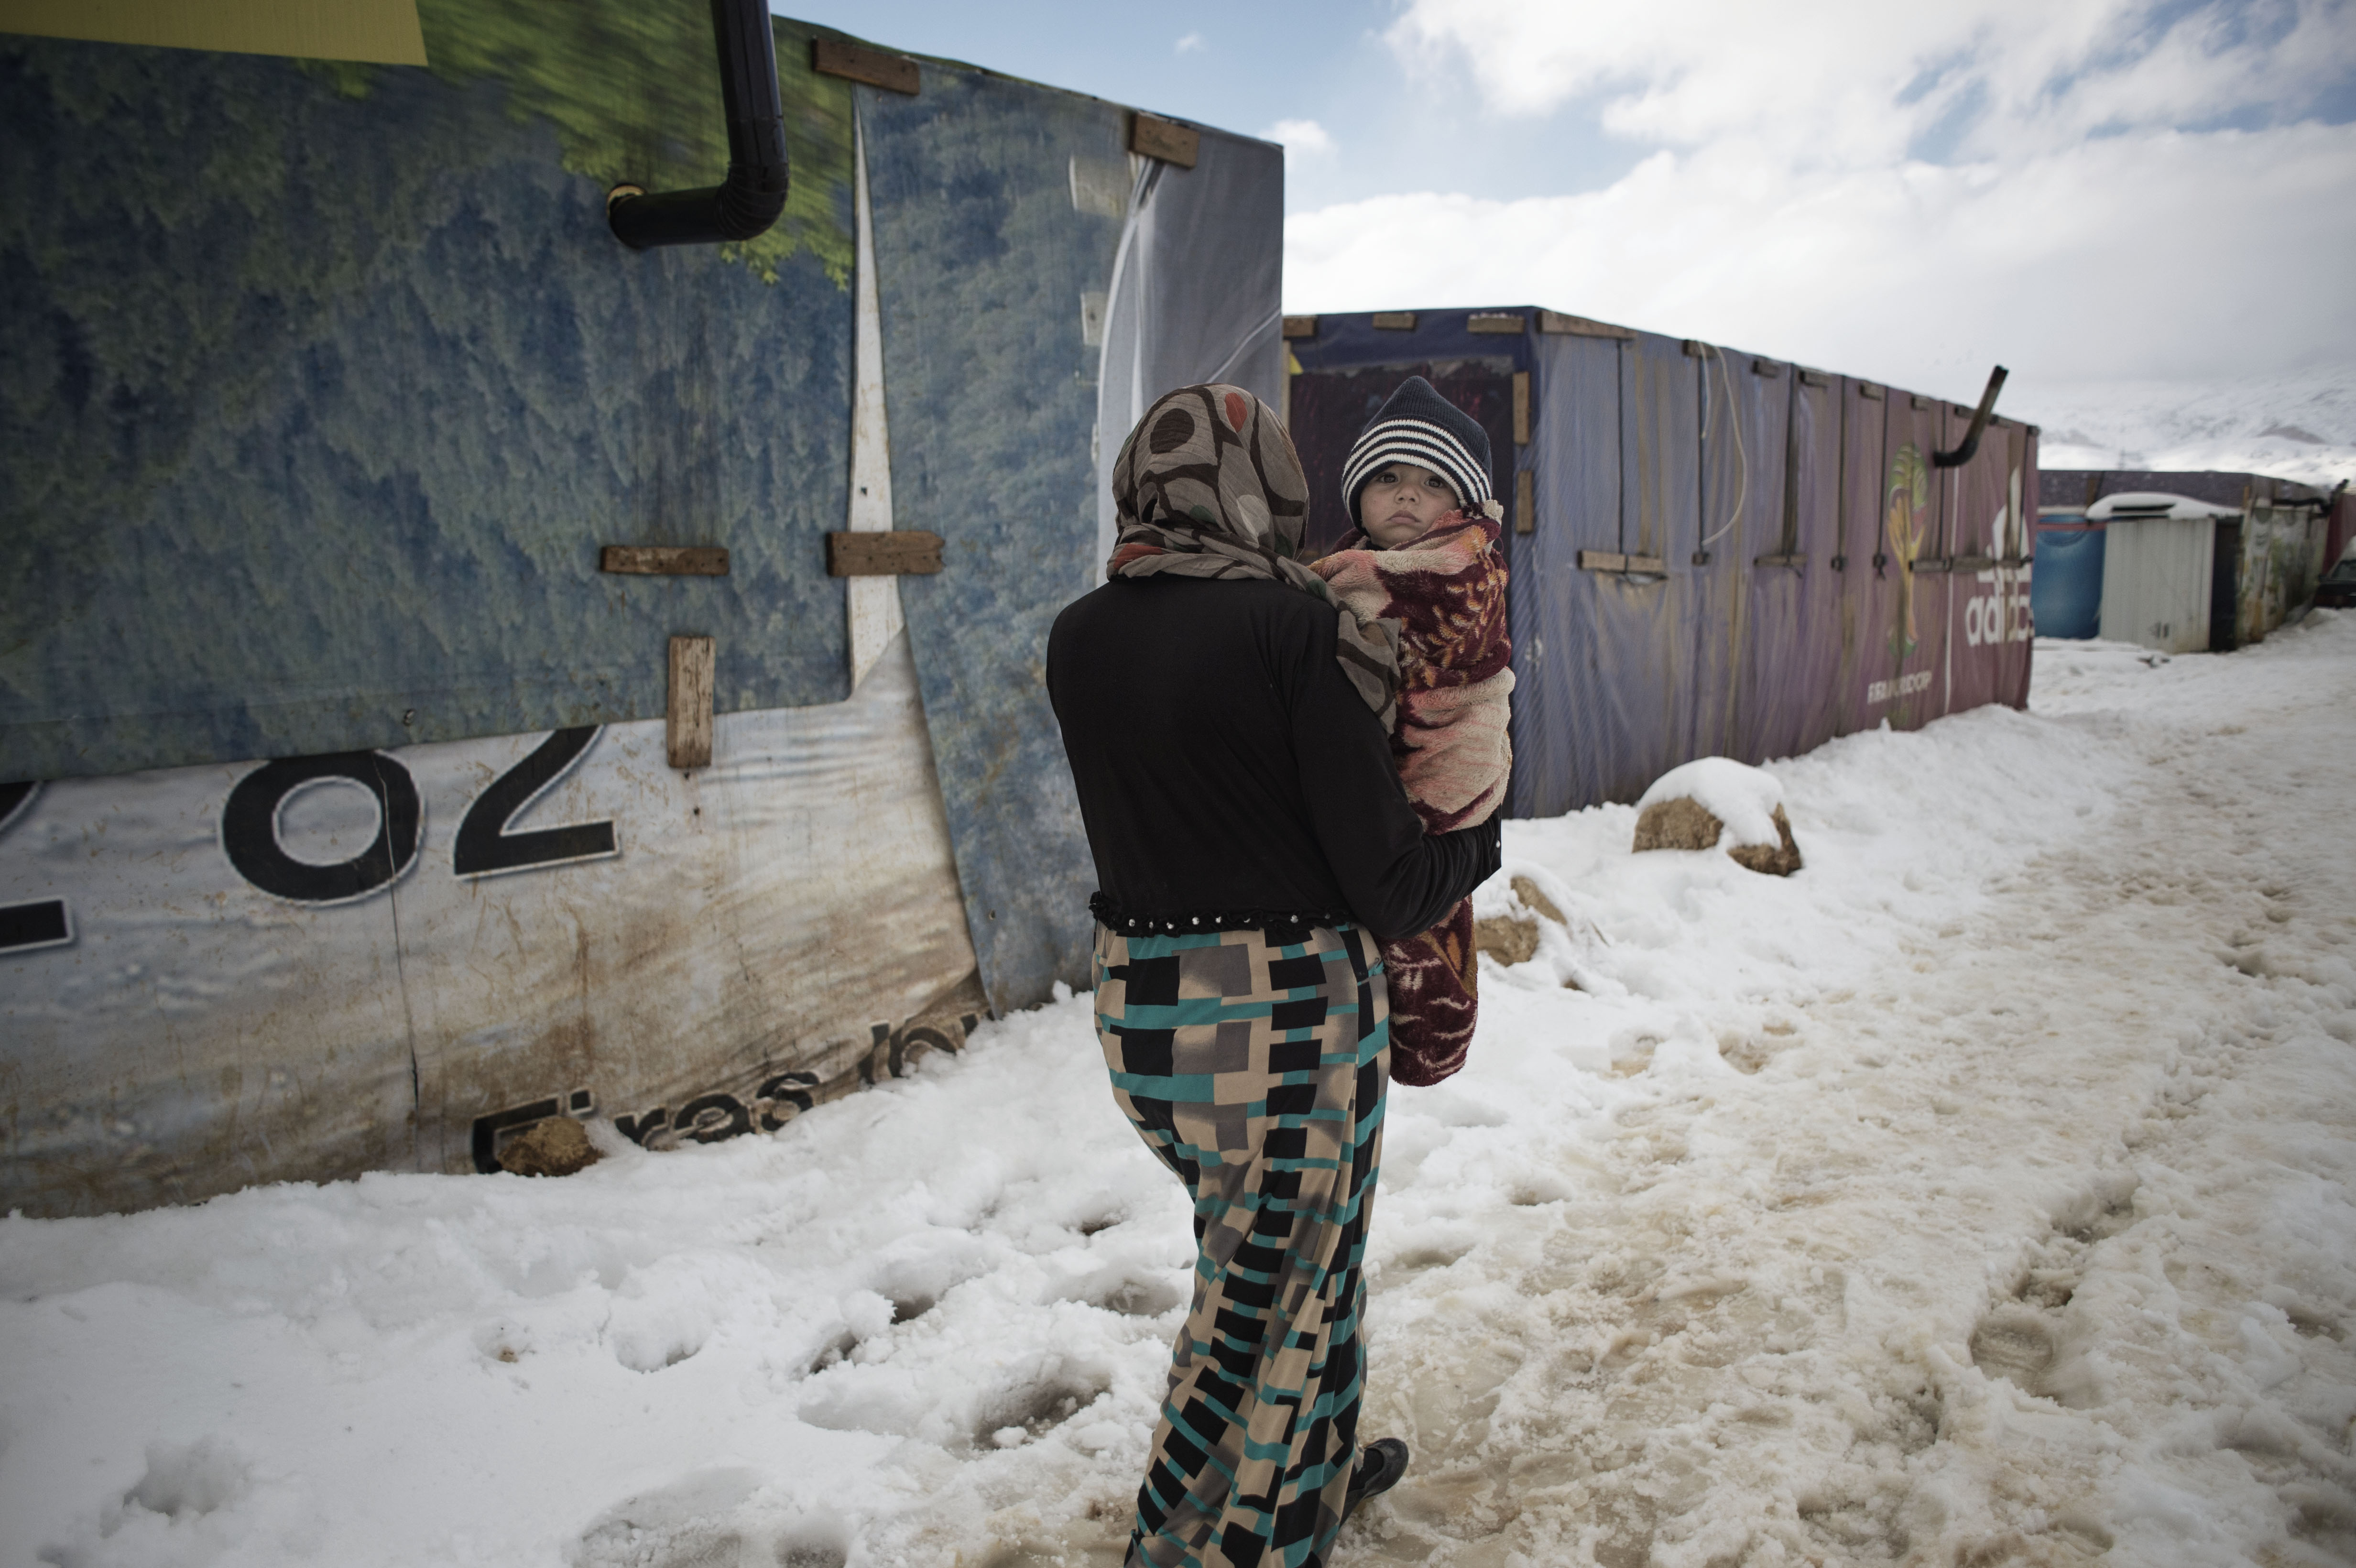 Walking through snow, a woman carries an infant in refugee camp number 29, in the Bekaa Valley of Lebanon on Jan. 8, 2015.